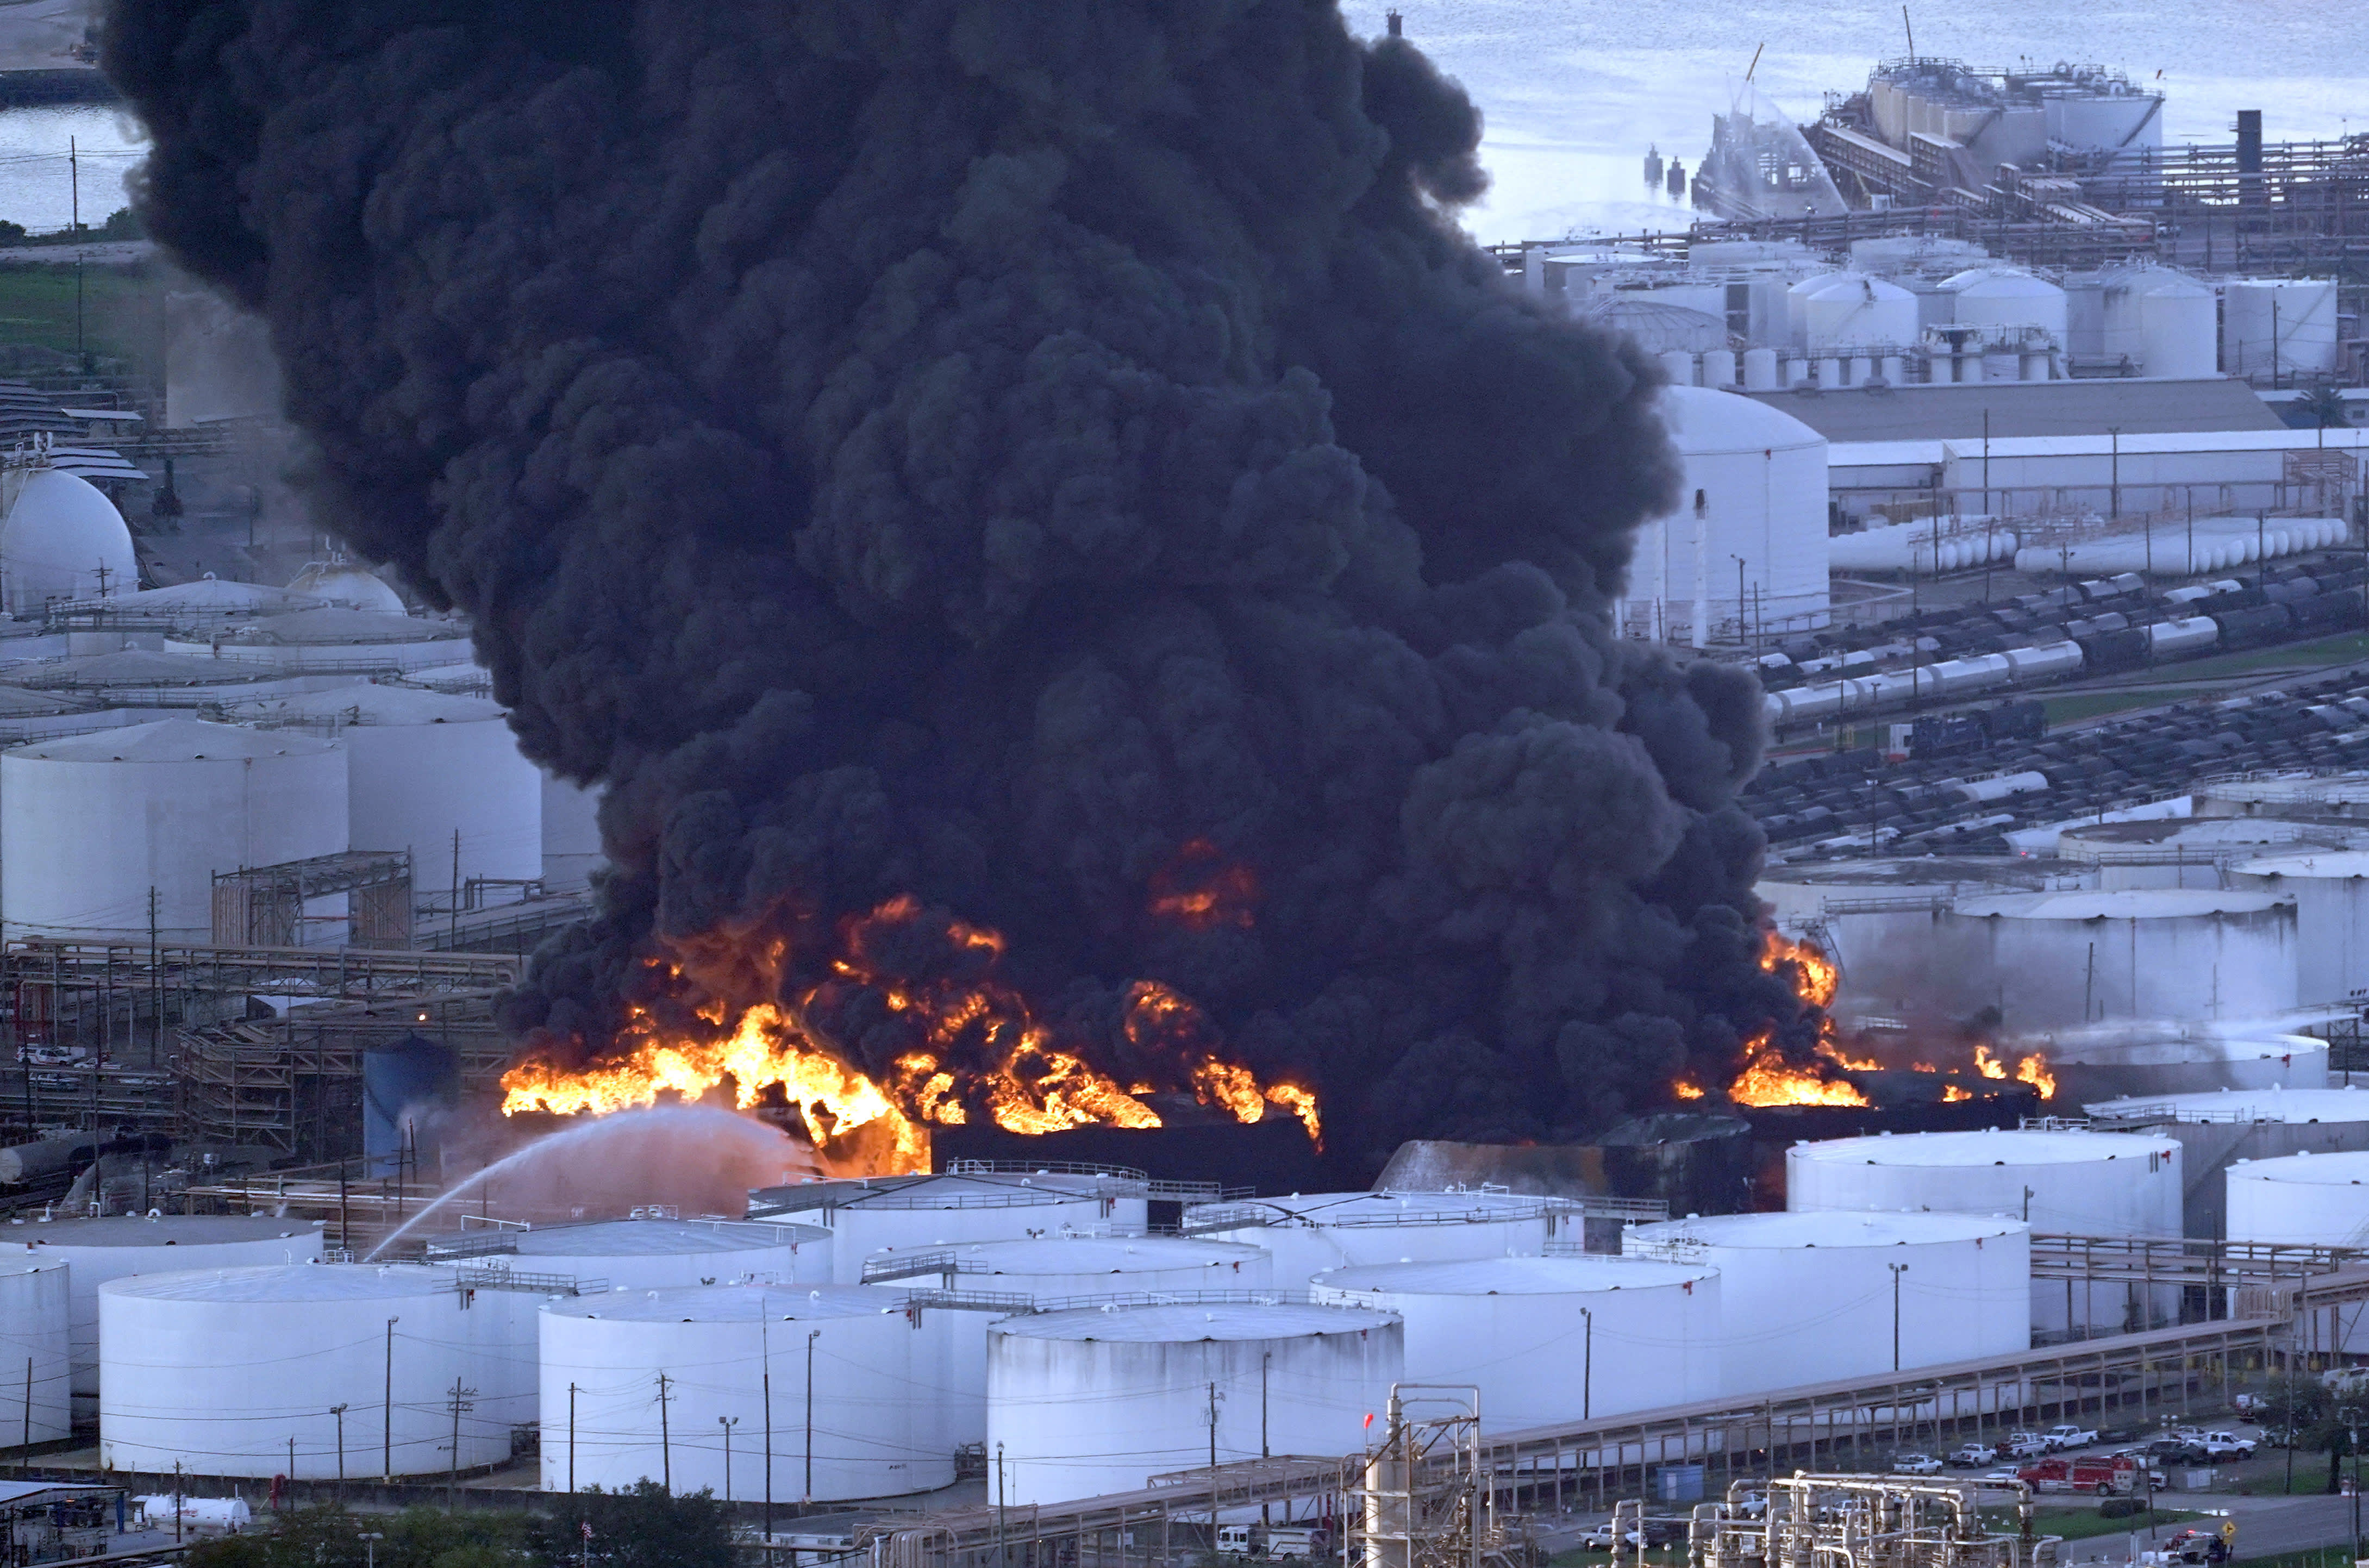 Texas fire spreads to more storage tanks after firefighting snag4359 x 2885